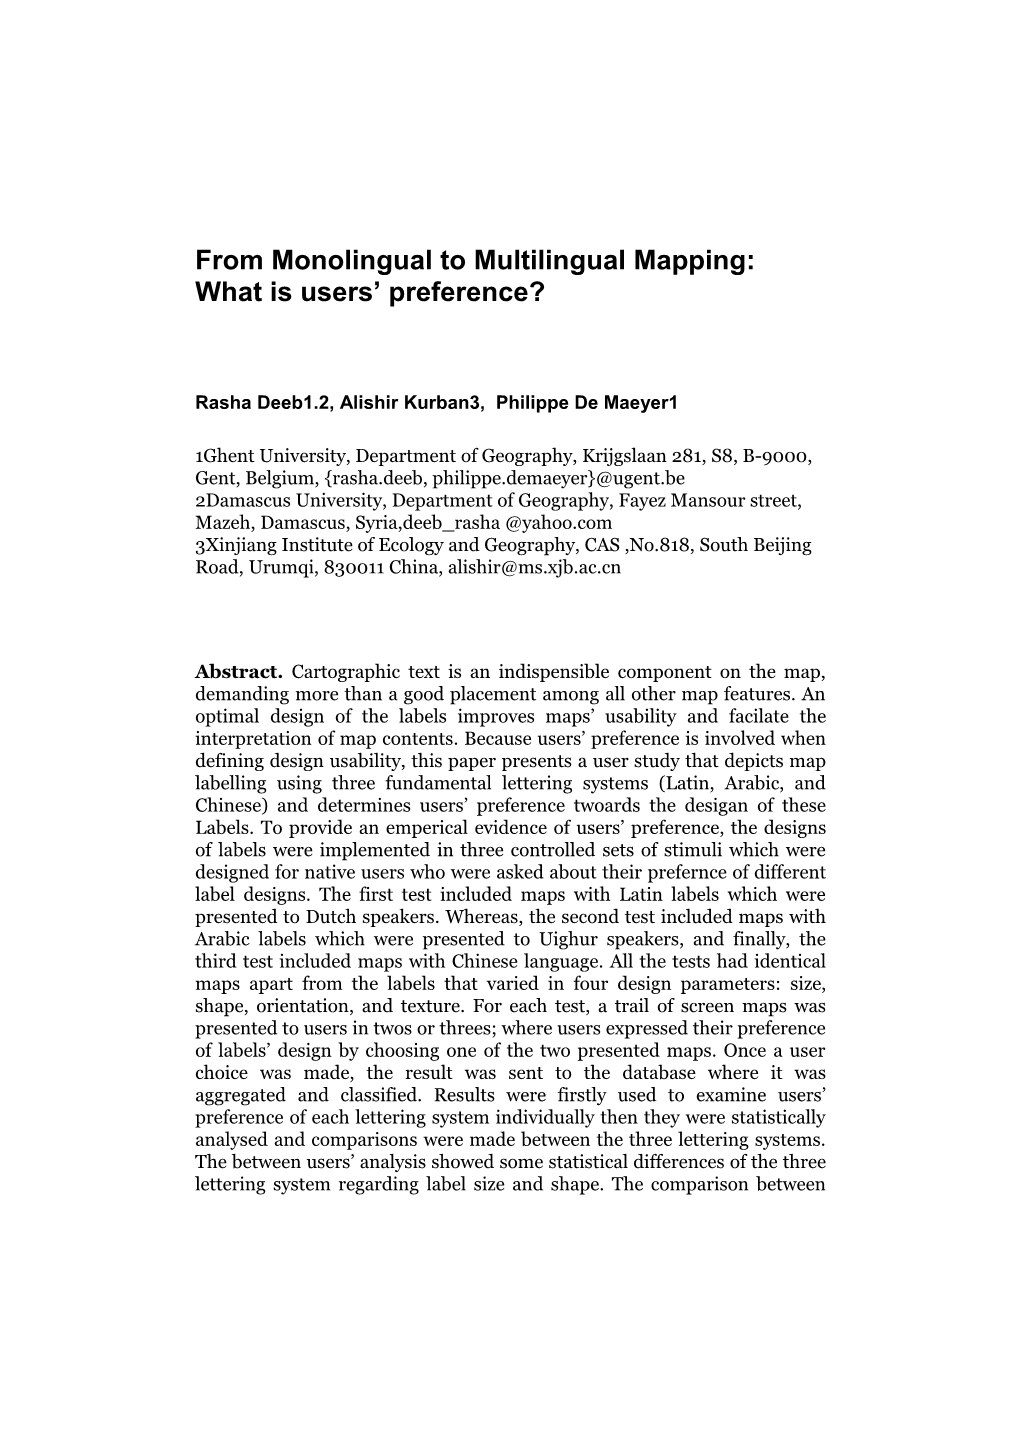 From Monolingual to Multilingual Mapping: What Is Users Preference?